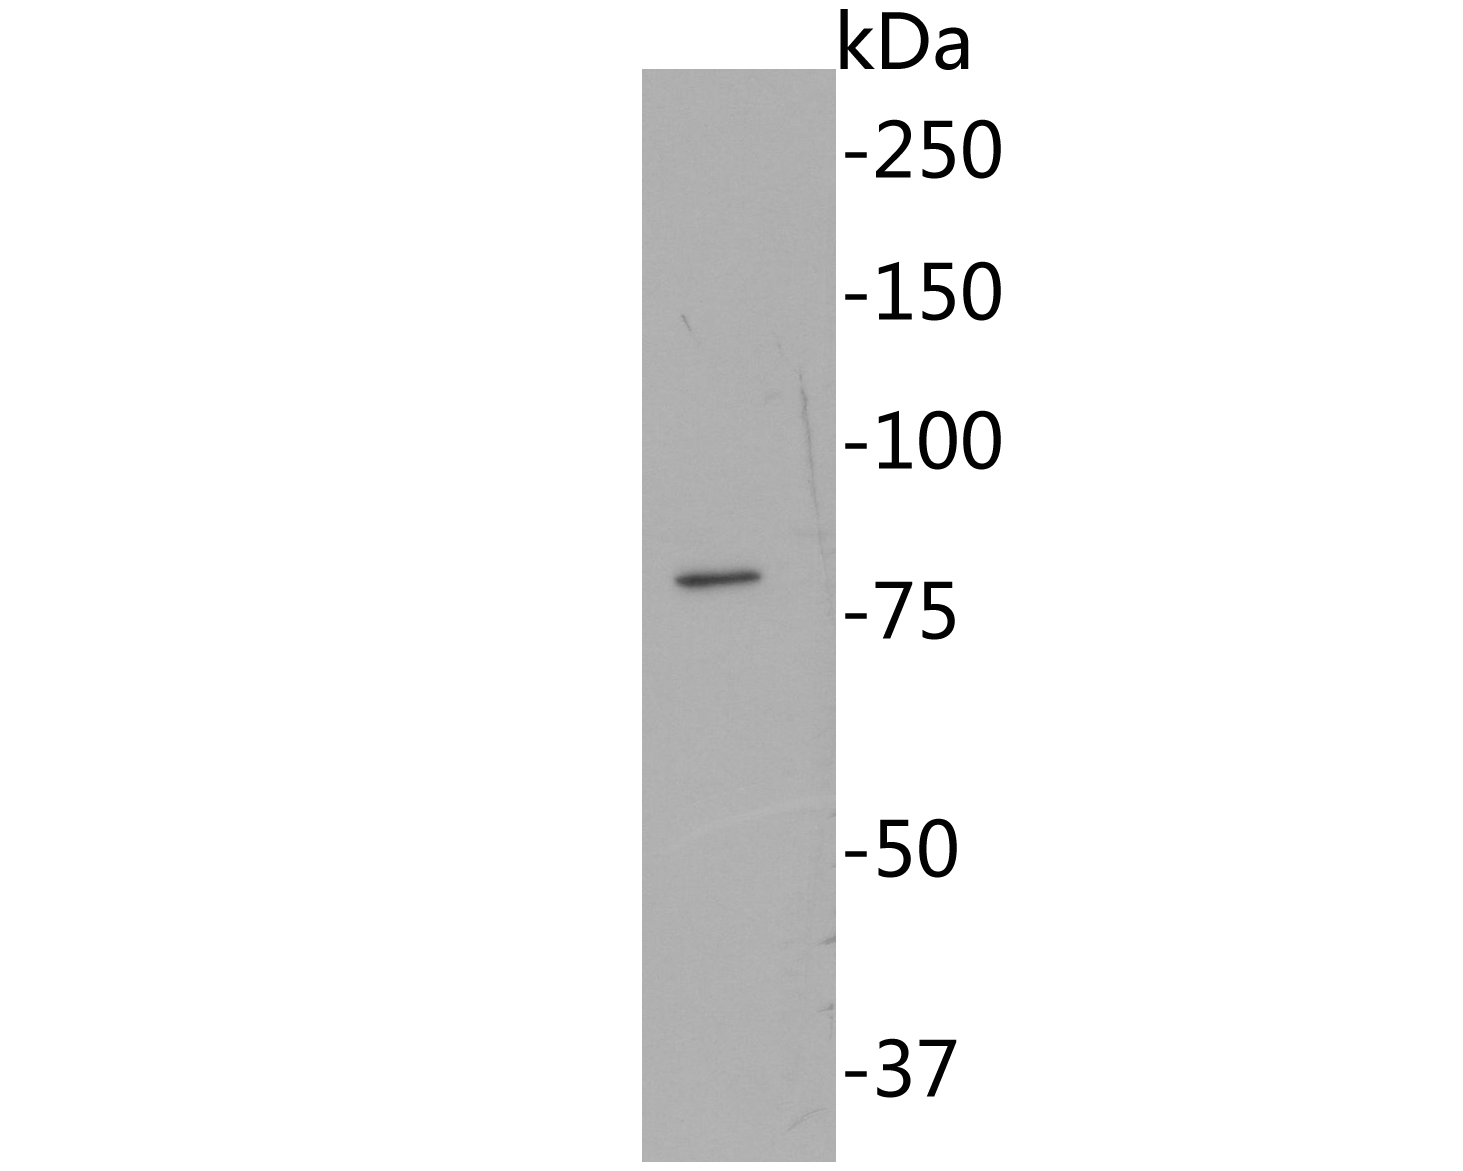 Western blot analysis of RAP80 on Siha cell lysates. Proteins were transferred to a PVDF membrane and blocked with 5% BSA in PBS for 1 hour at room temperature. The primary antibody (EM1902-05, 1/500) was used in 5% BSA at room temperature for 2 hours. Goat Anti-Mouse IgG - HRP Secondary Antibody (HA1006) at 1:5,000 dilution was used for 1 hour at room temperature.